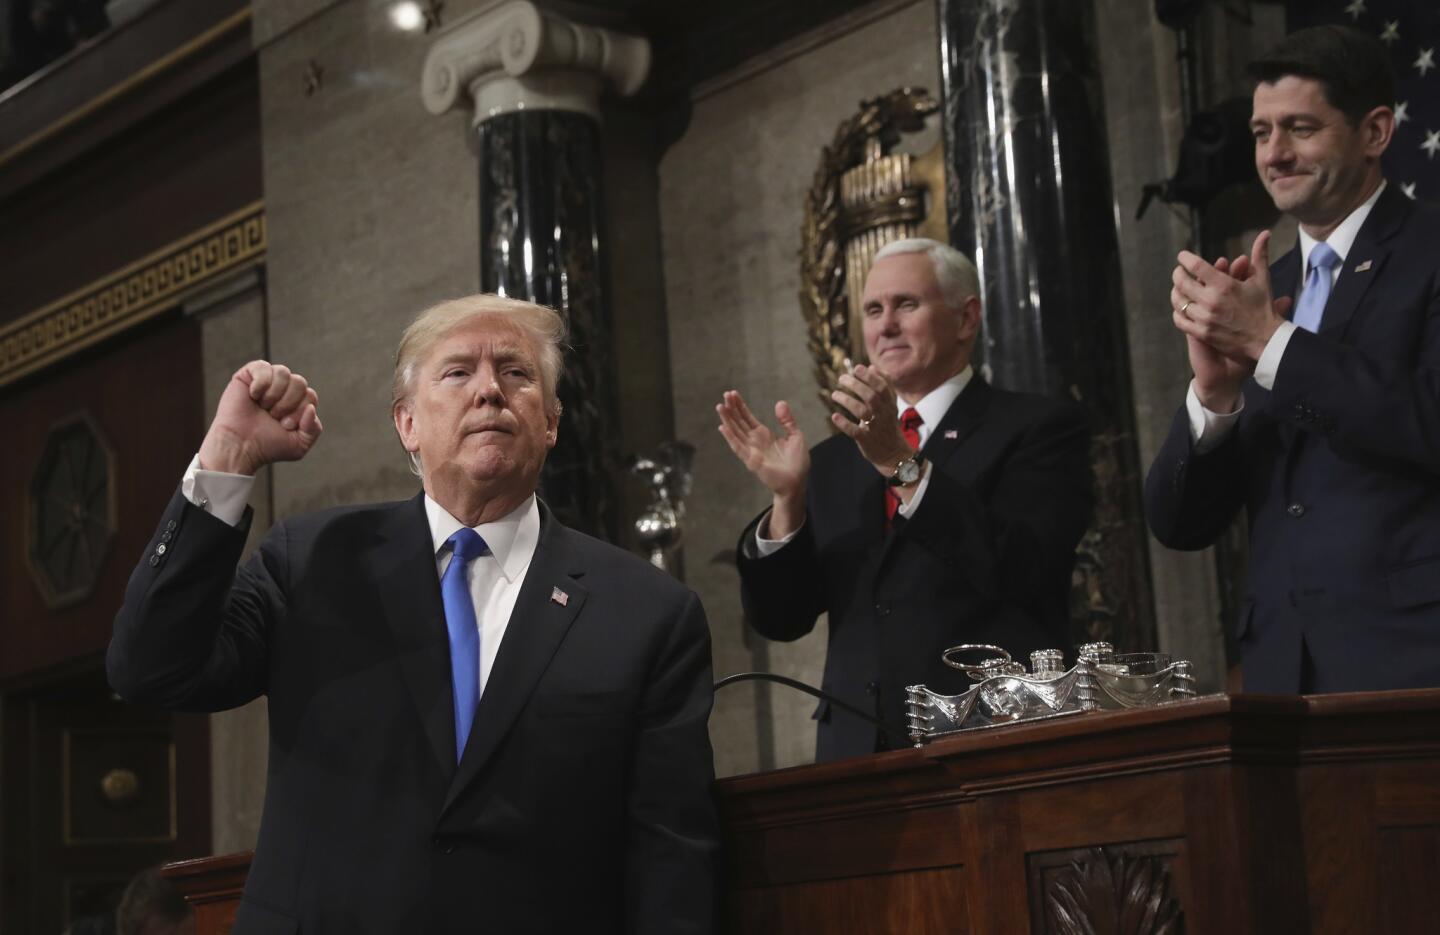 President Trump gestures as he finishes his first State of the Union address.